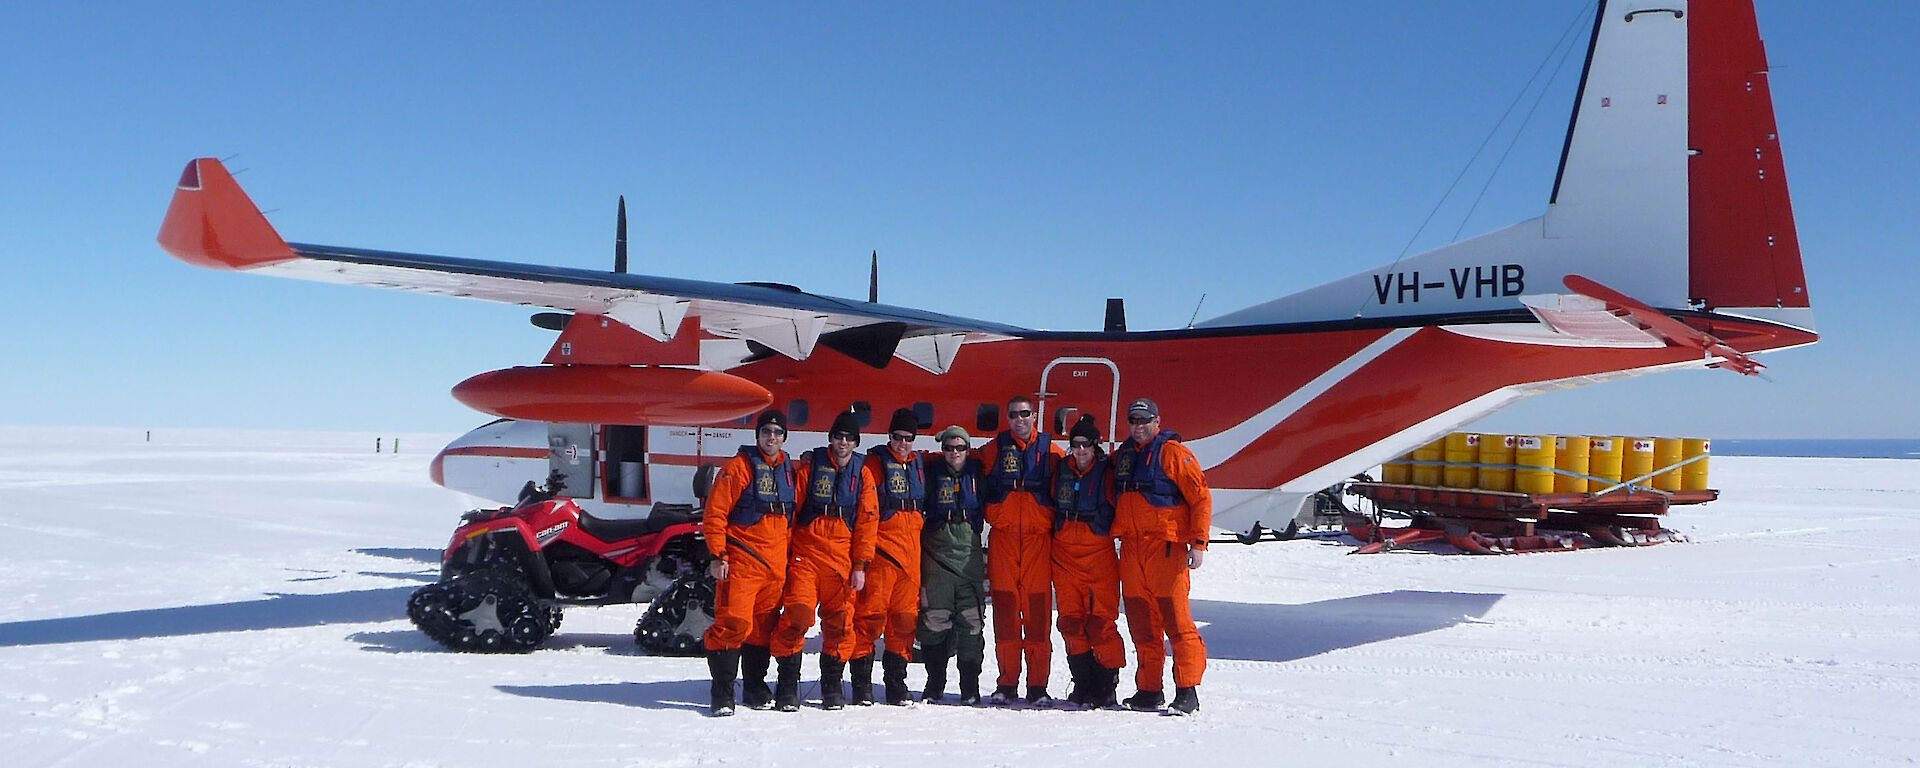 Team Minke and the C212-400 aircraft, which was fitted with a variety of imaging systems to capture whales hidden from the view of the team.